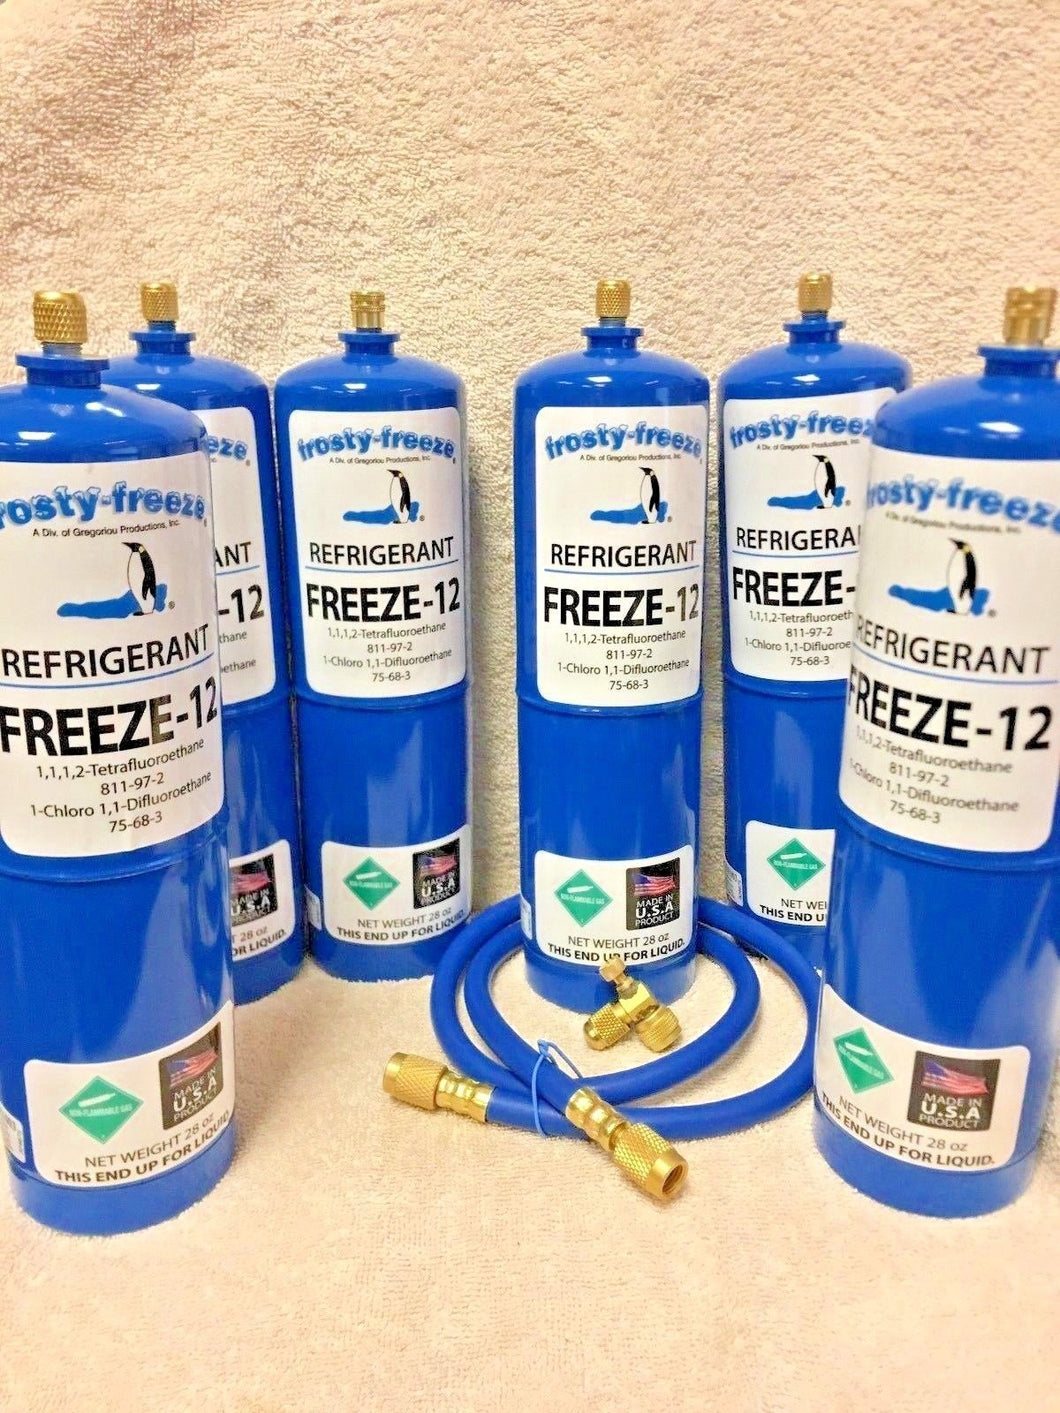 FREEZE 12, R-12, R12 REPLACEMENT, NO CFC'S,(6) 28 oz. Cans, On/Off Valve, Hose